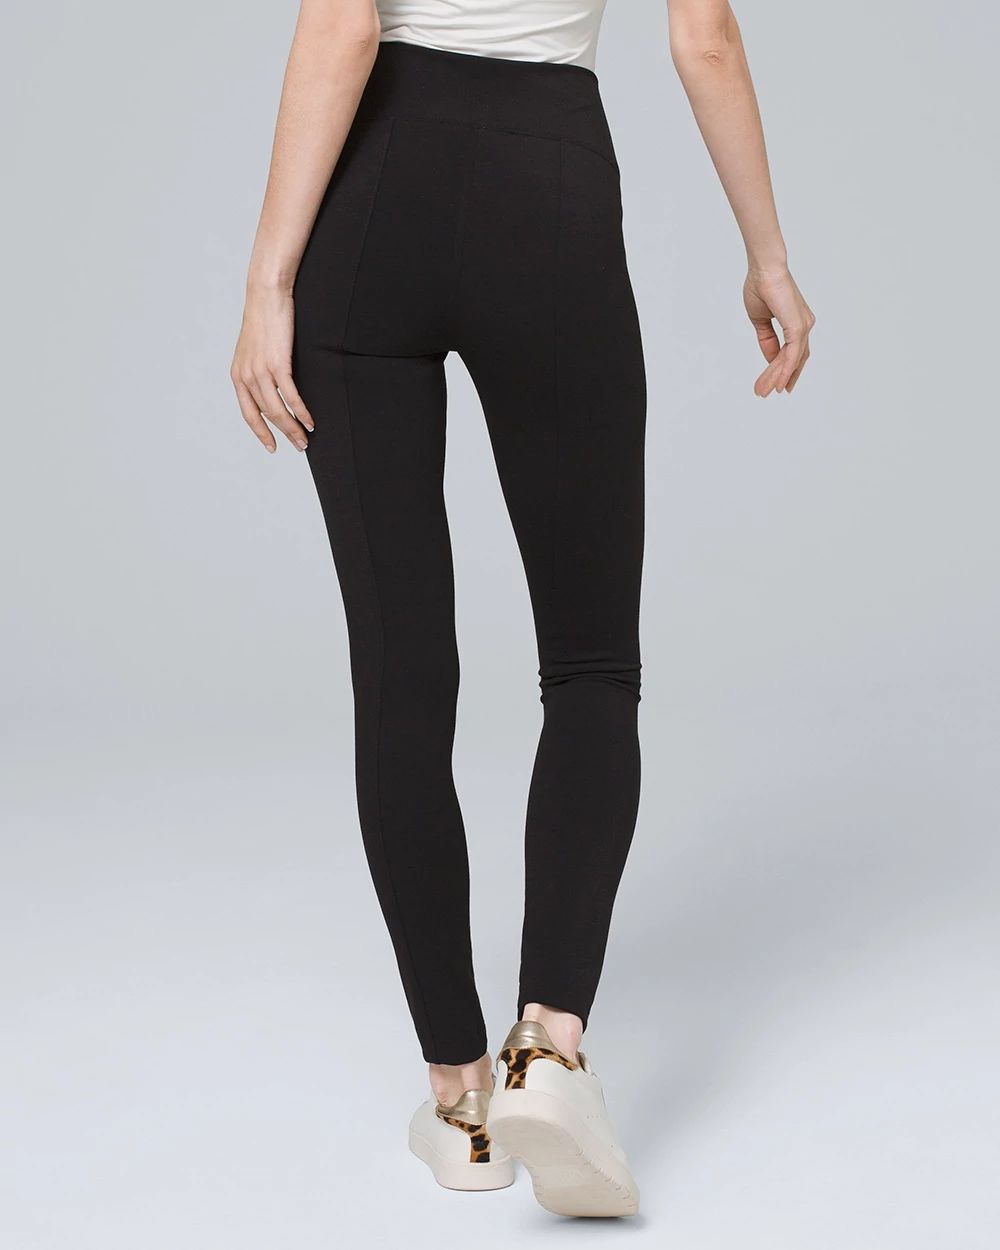 Touch of Cool™ WHBM Runway Leggings click to view larger image.